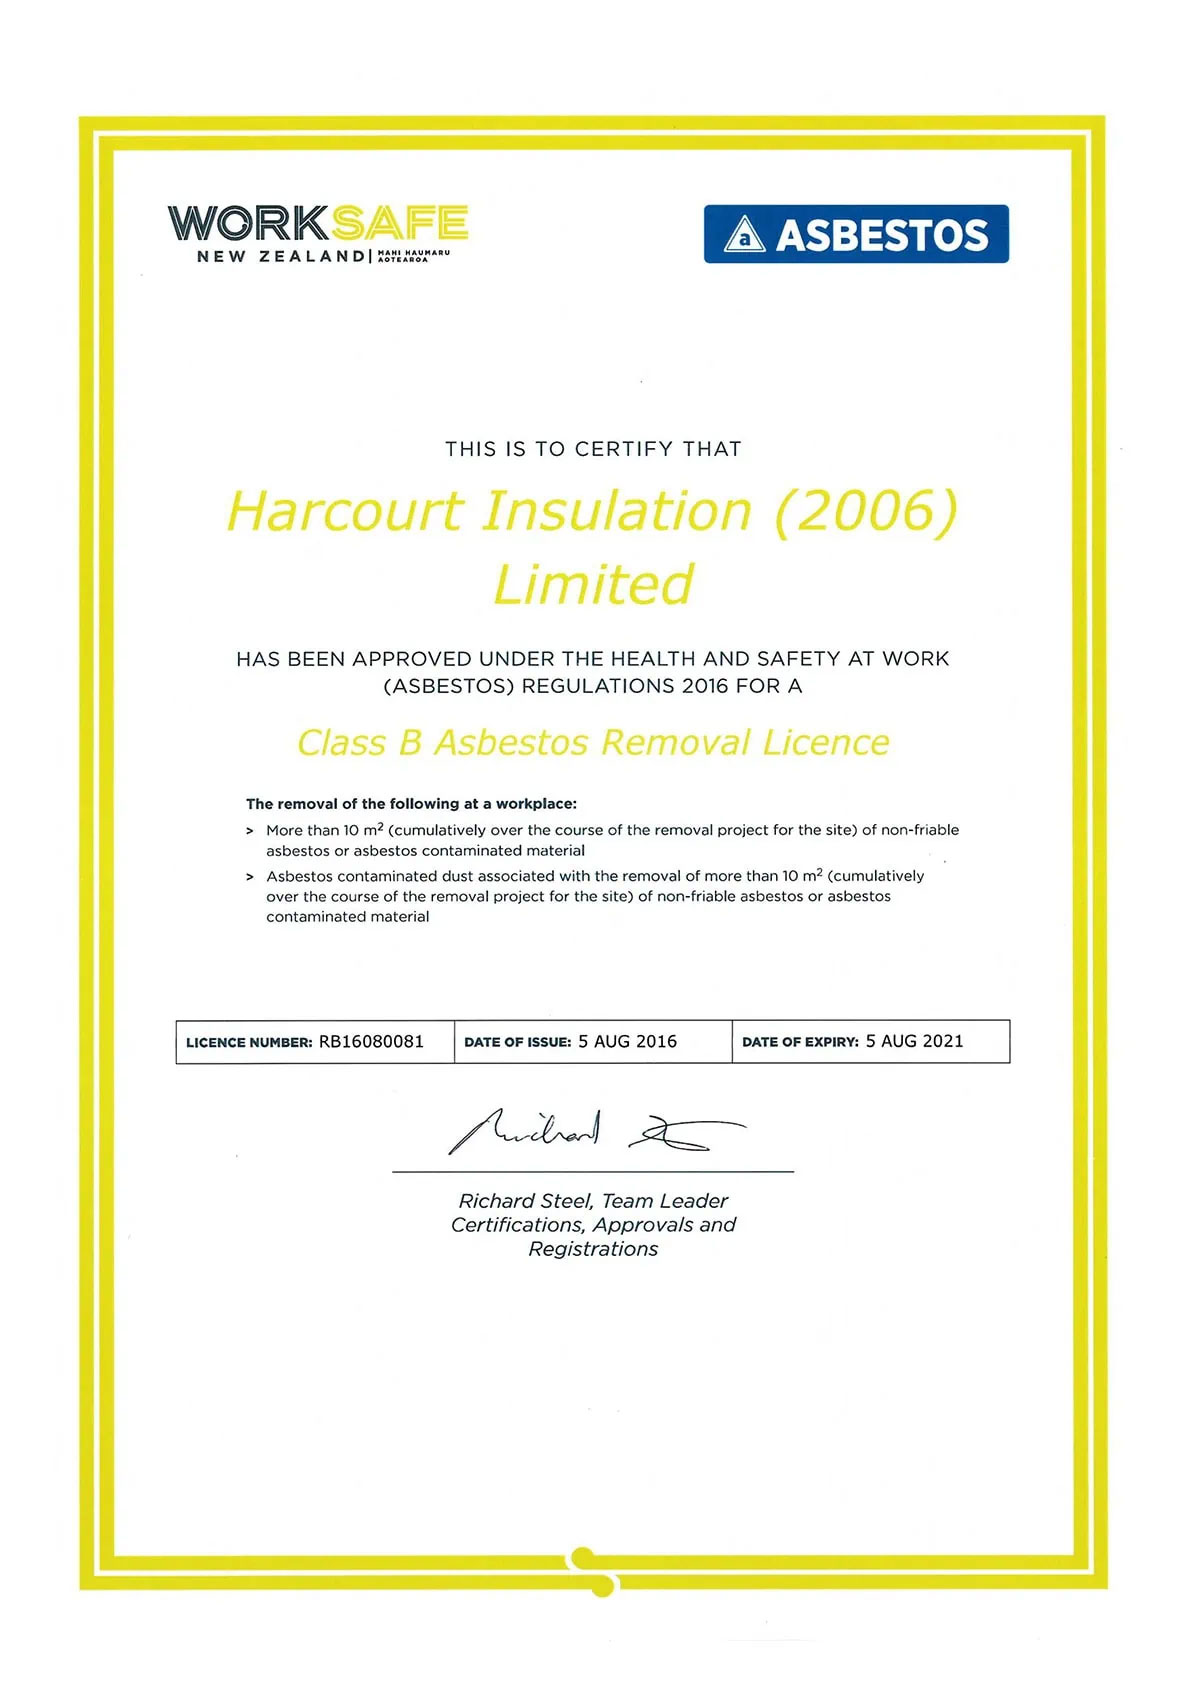 Harcourt-insulation-and-asbestos-removal-services-in-Aukland-and-Christchurch-licence-6